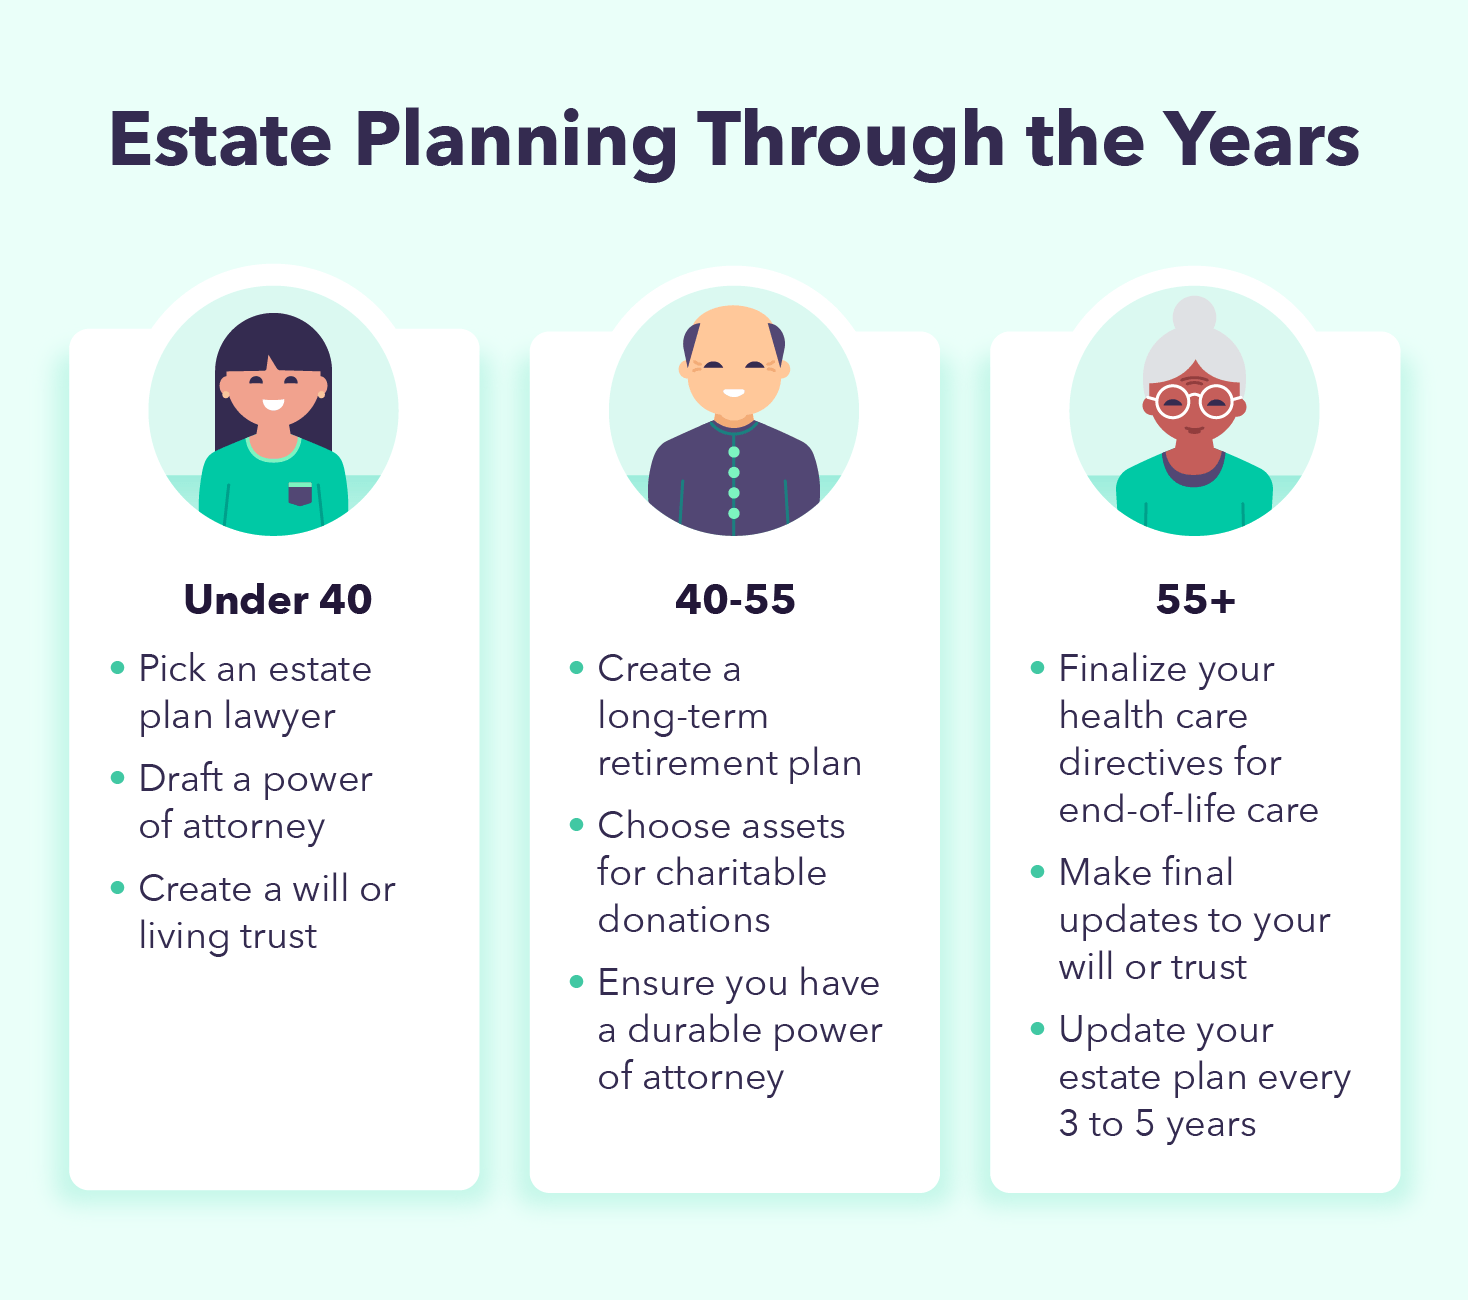 A chart showing estate planning for every age starting before age 40 and all the way to 55+